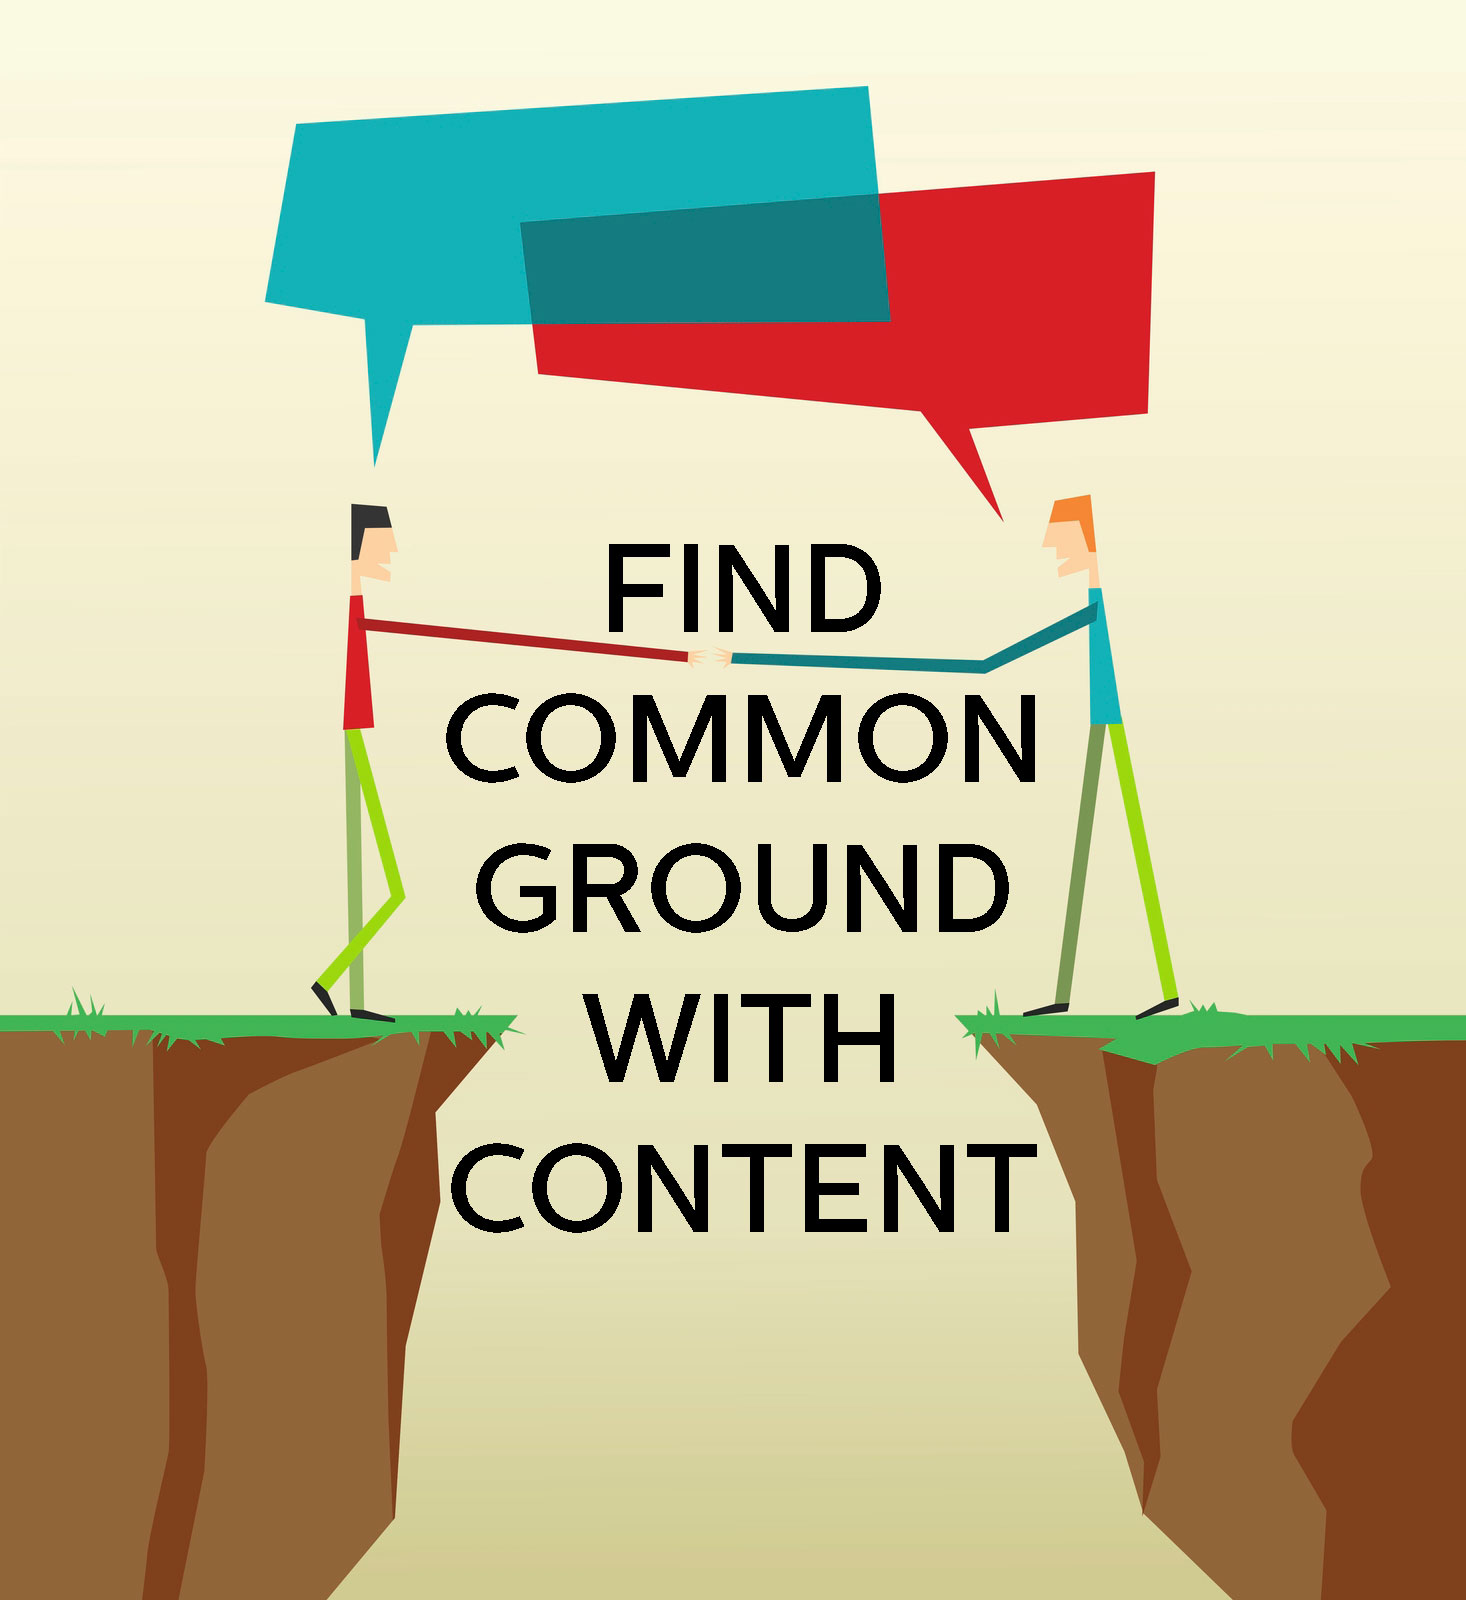 content gets marketers and customers on common ground